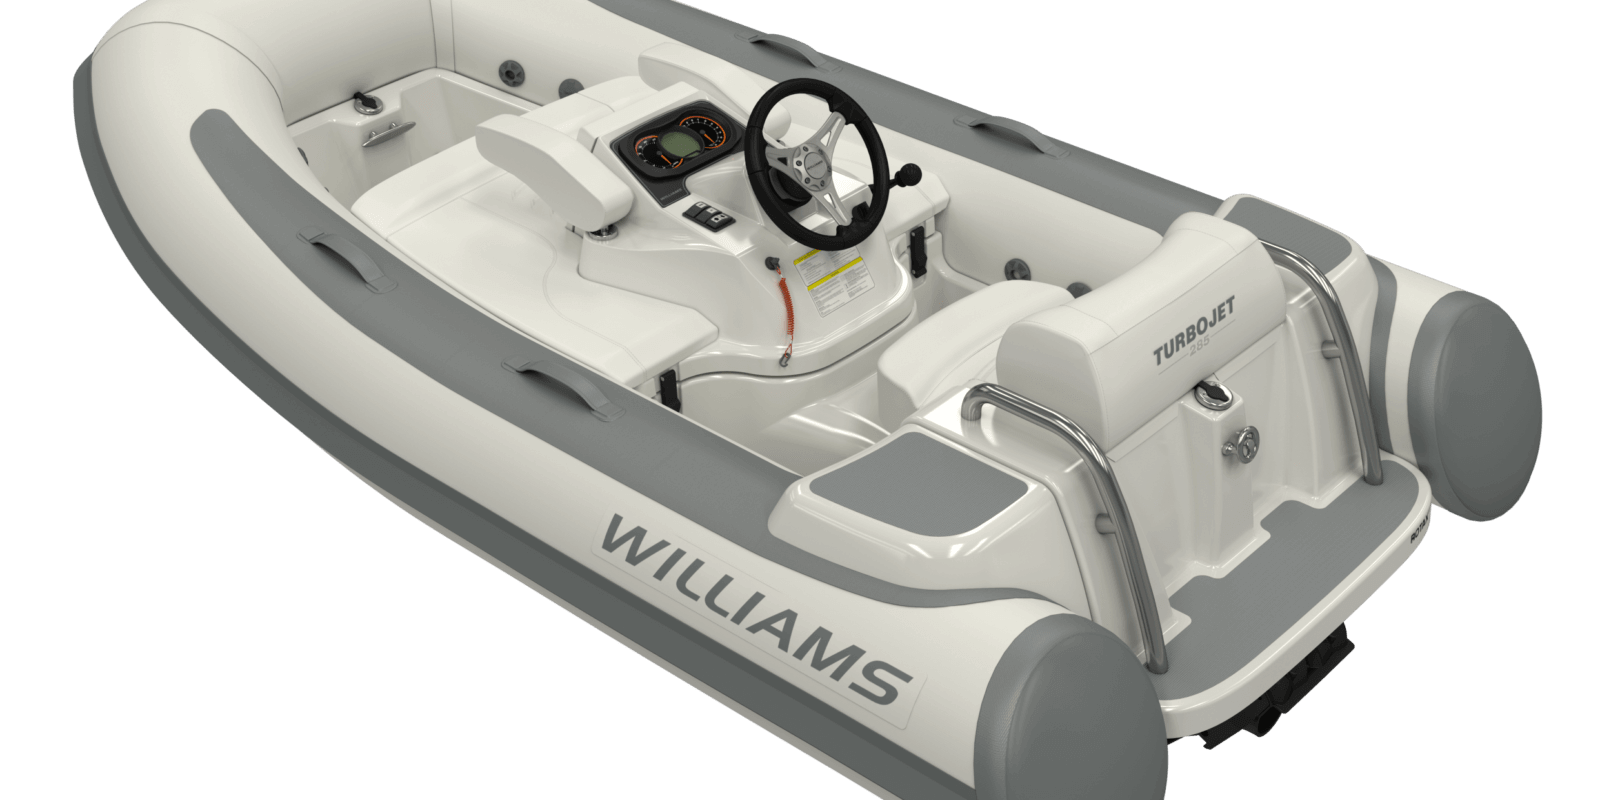 Williams to re-launch the iconic Turbojet 285 and Turbojet 325